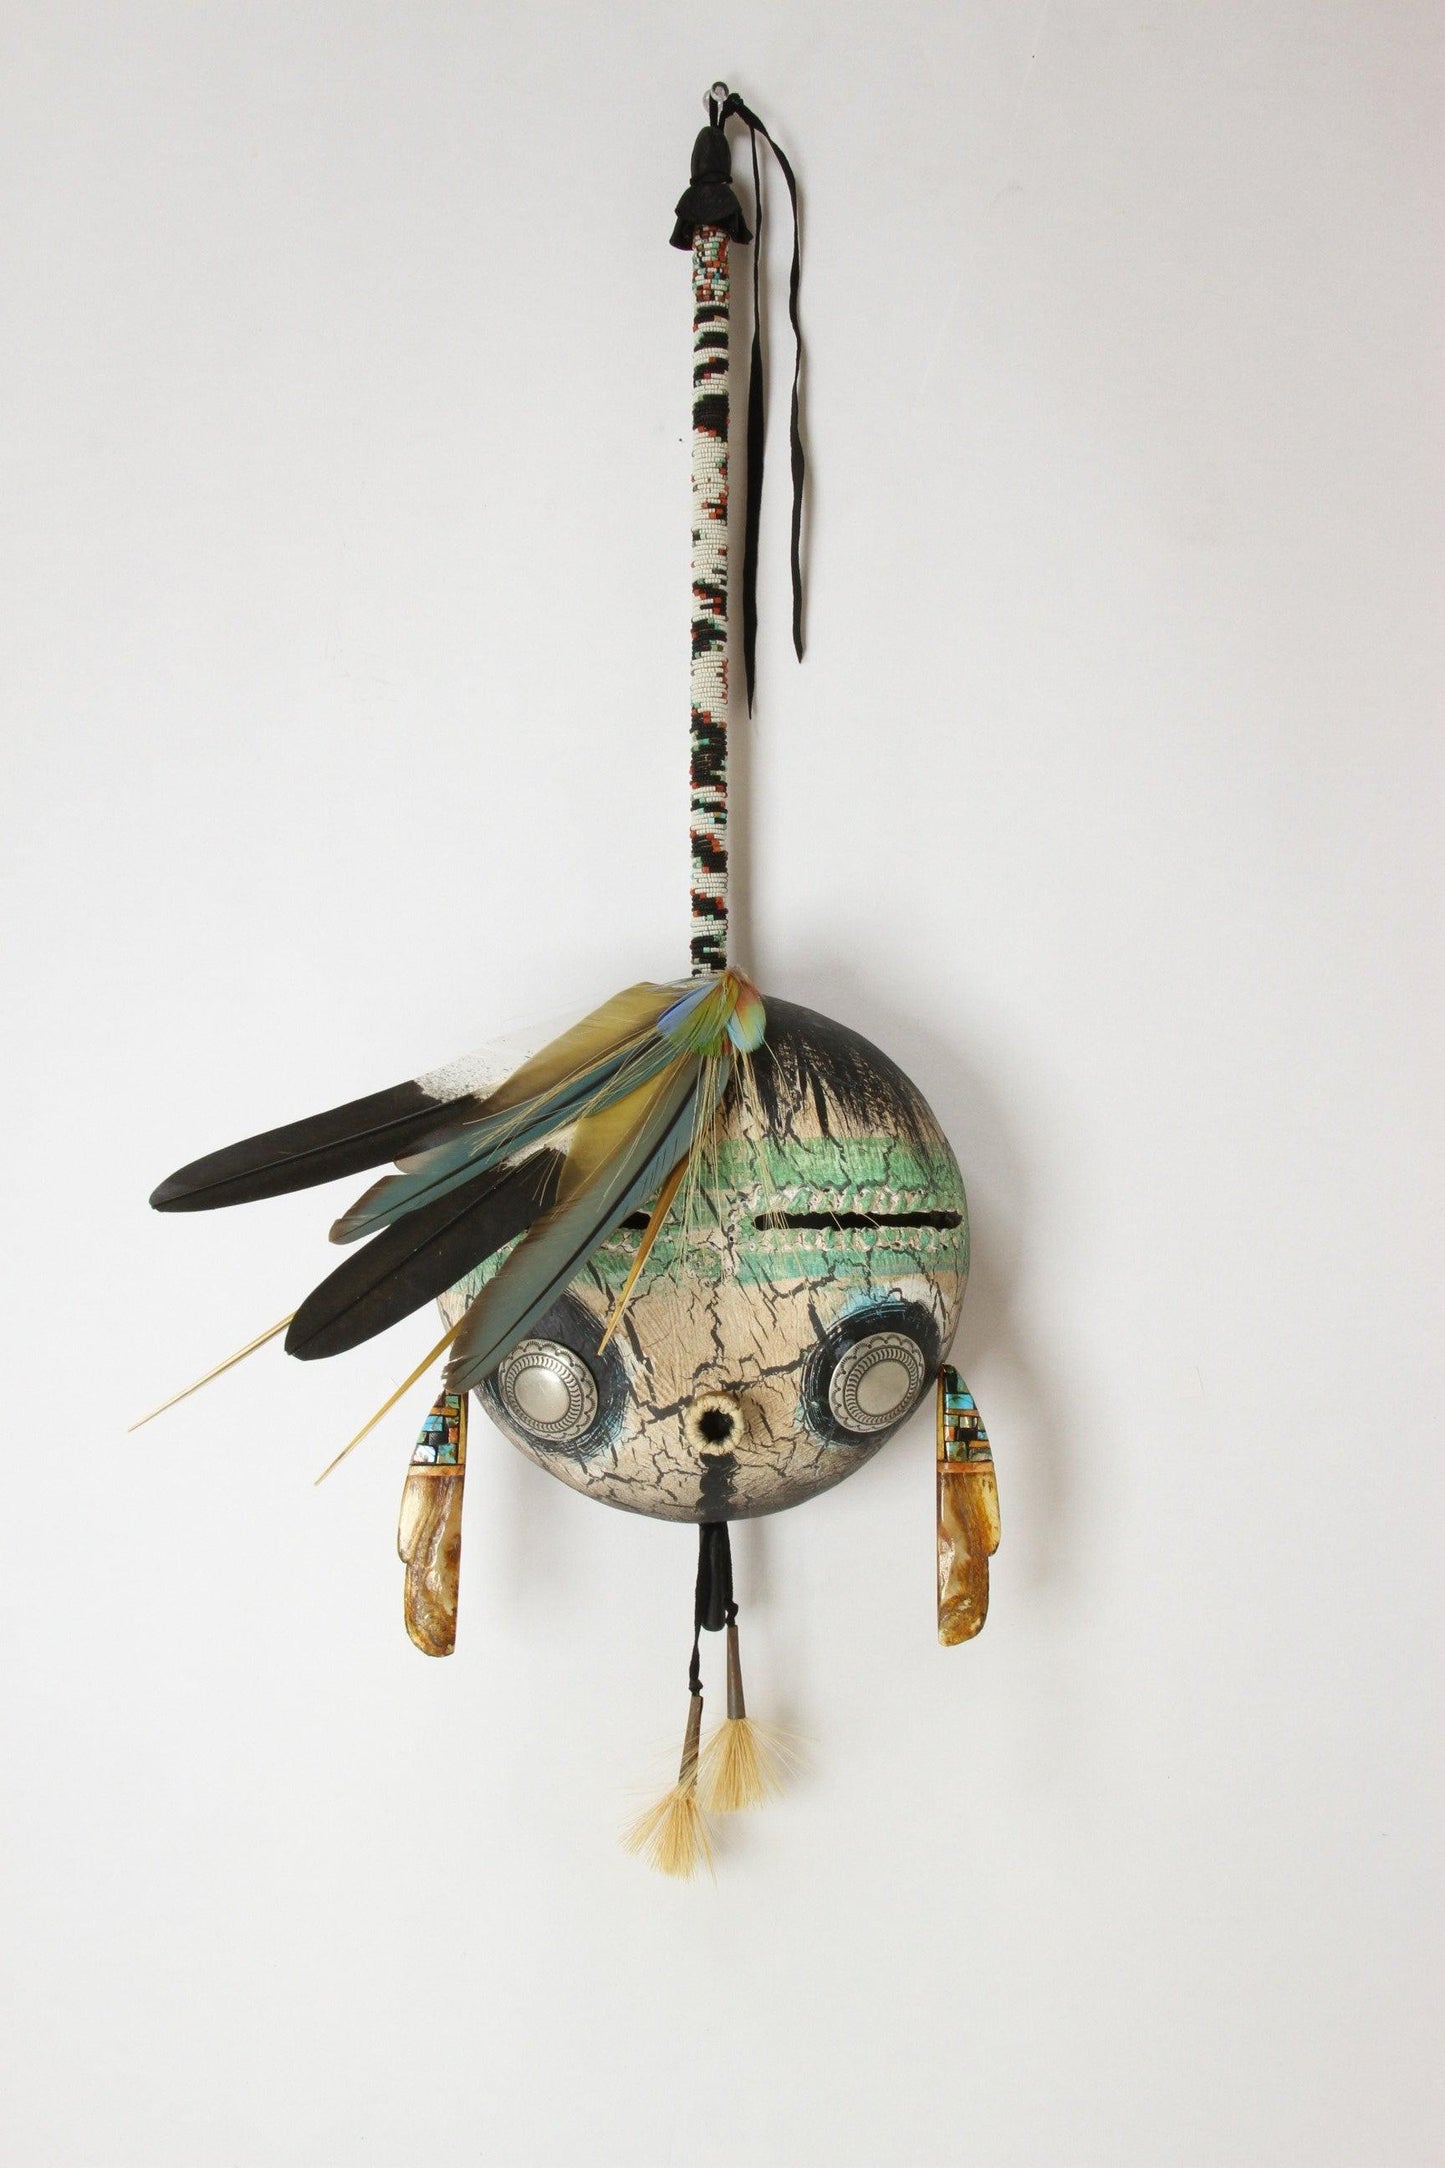 Rattle with Concho Cheeks-Gourd-Robert Rivera-Sorrel Sky Gallery